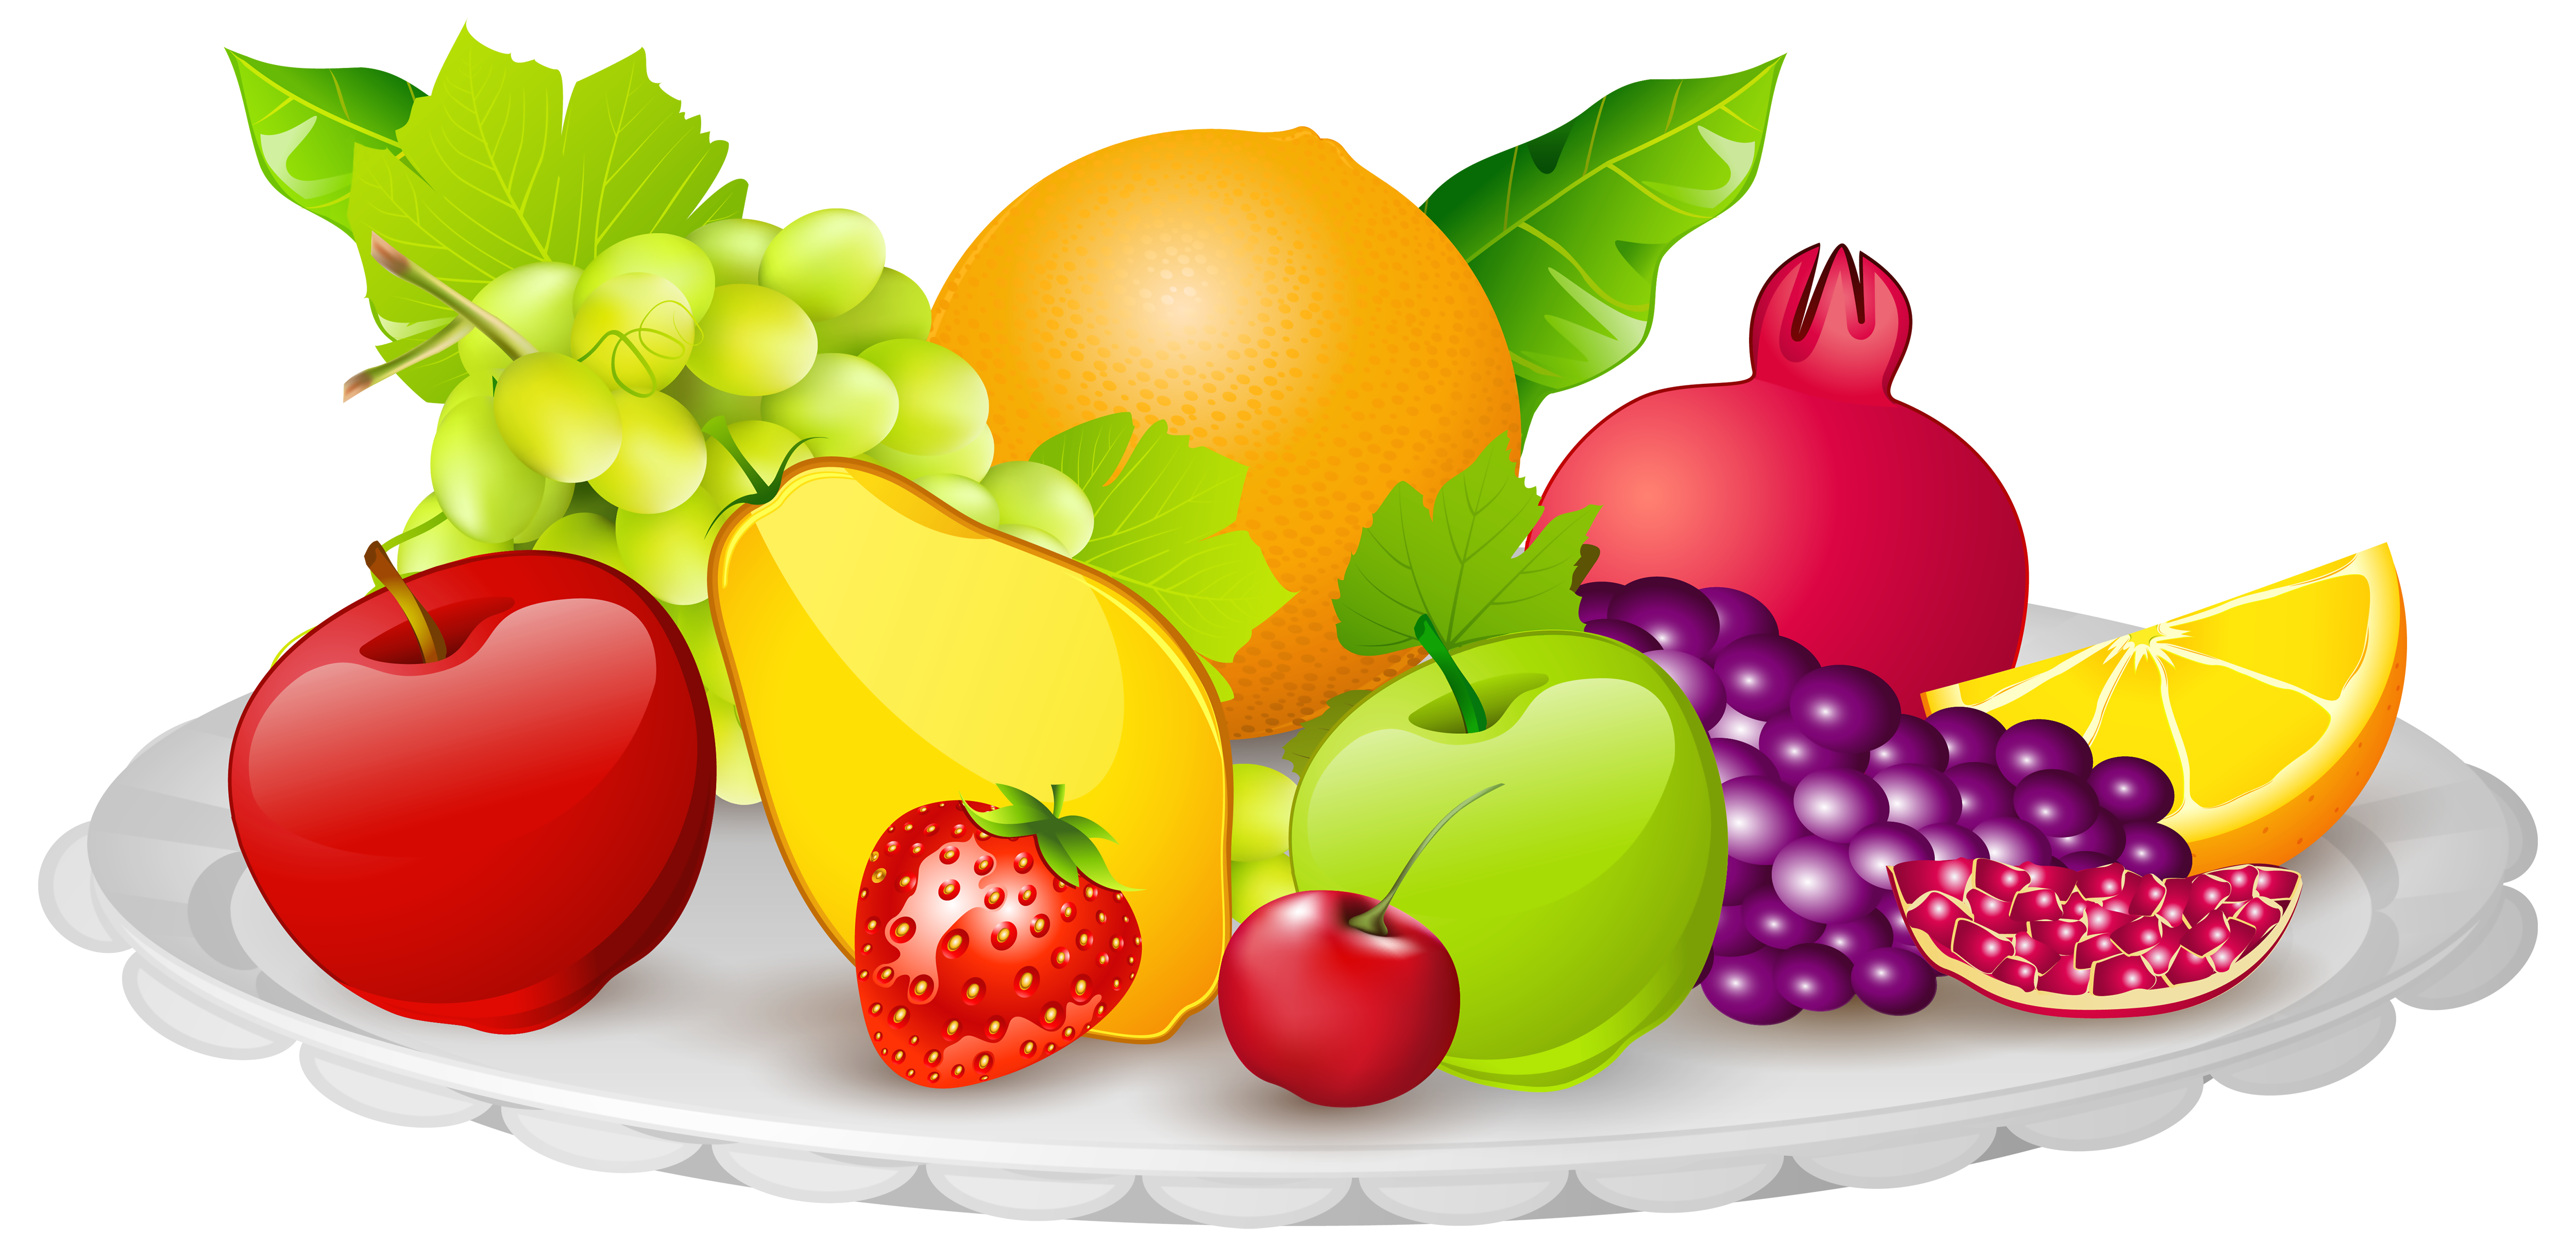 Plate with Fruits PNG Clipart Image | Gallery Yopriceville - High ...